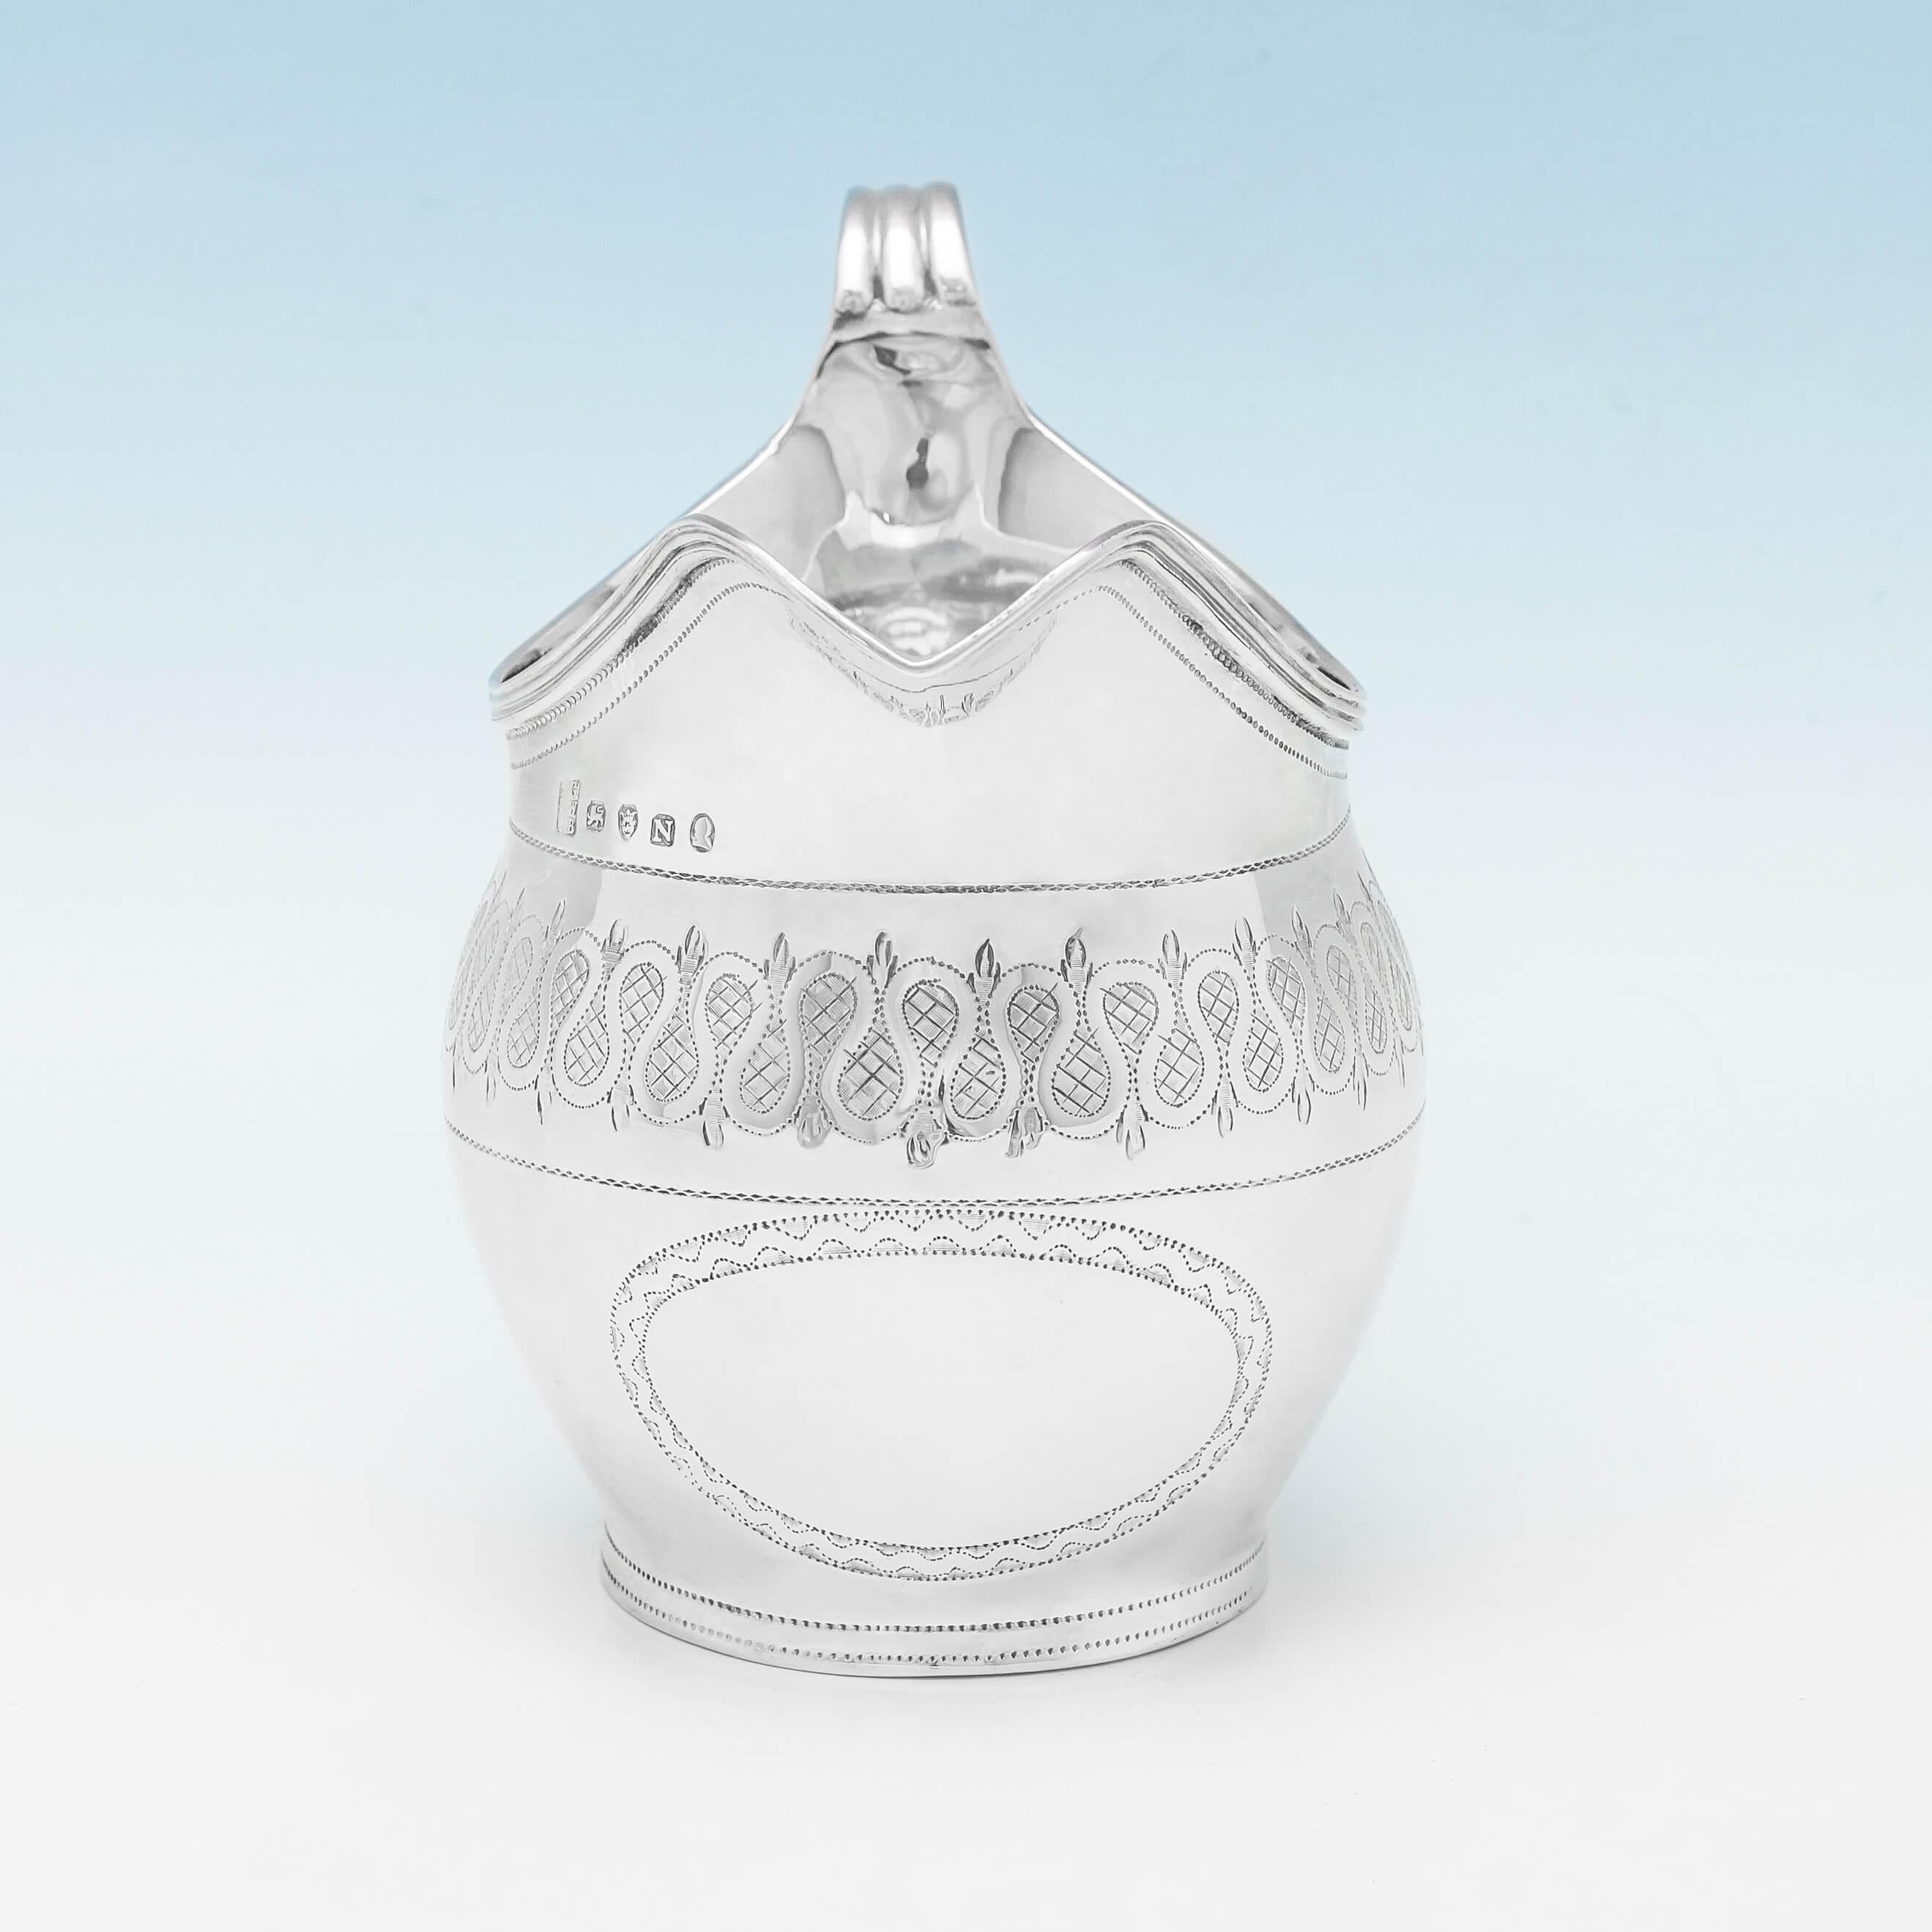 Hallmarked in London in 1808 by Godbehere, Wigan, & Bult, this fine, antique, George III, sterling silver cream jug, has a band of engraving around the body, reed borders, and a vacant cartouche. The cream jug measures 4